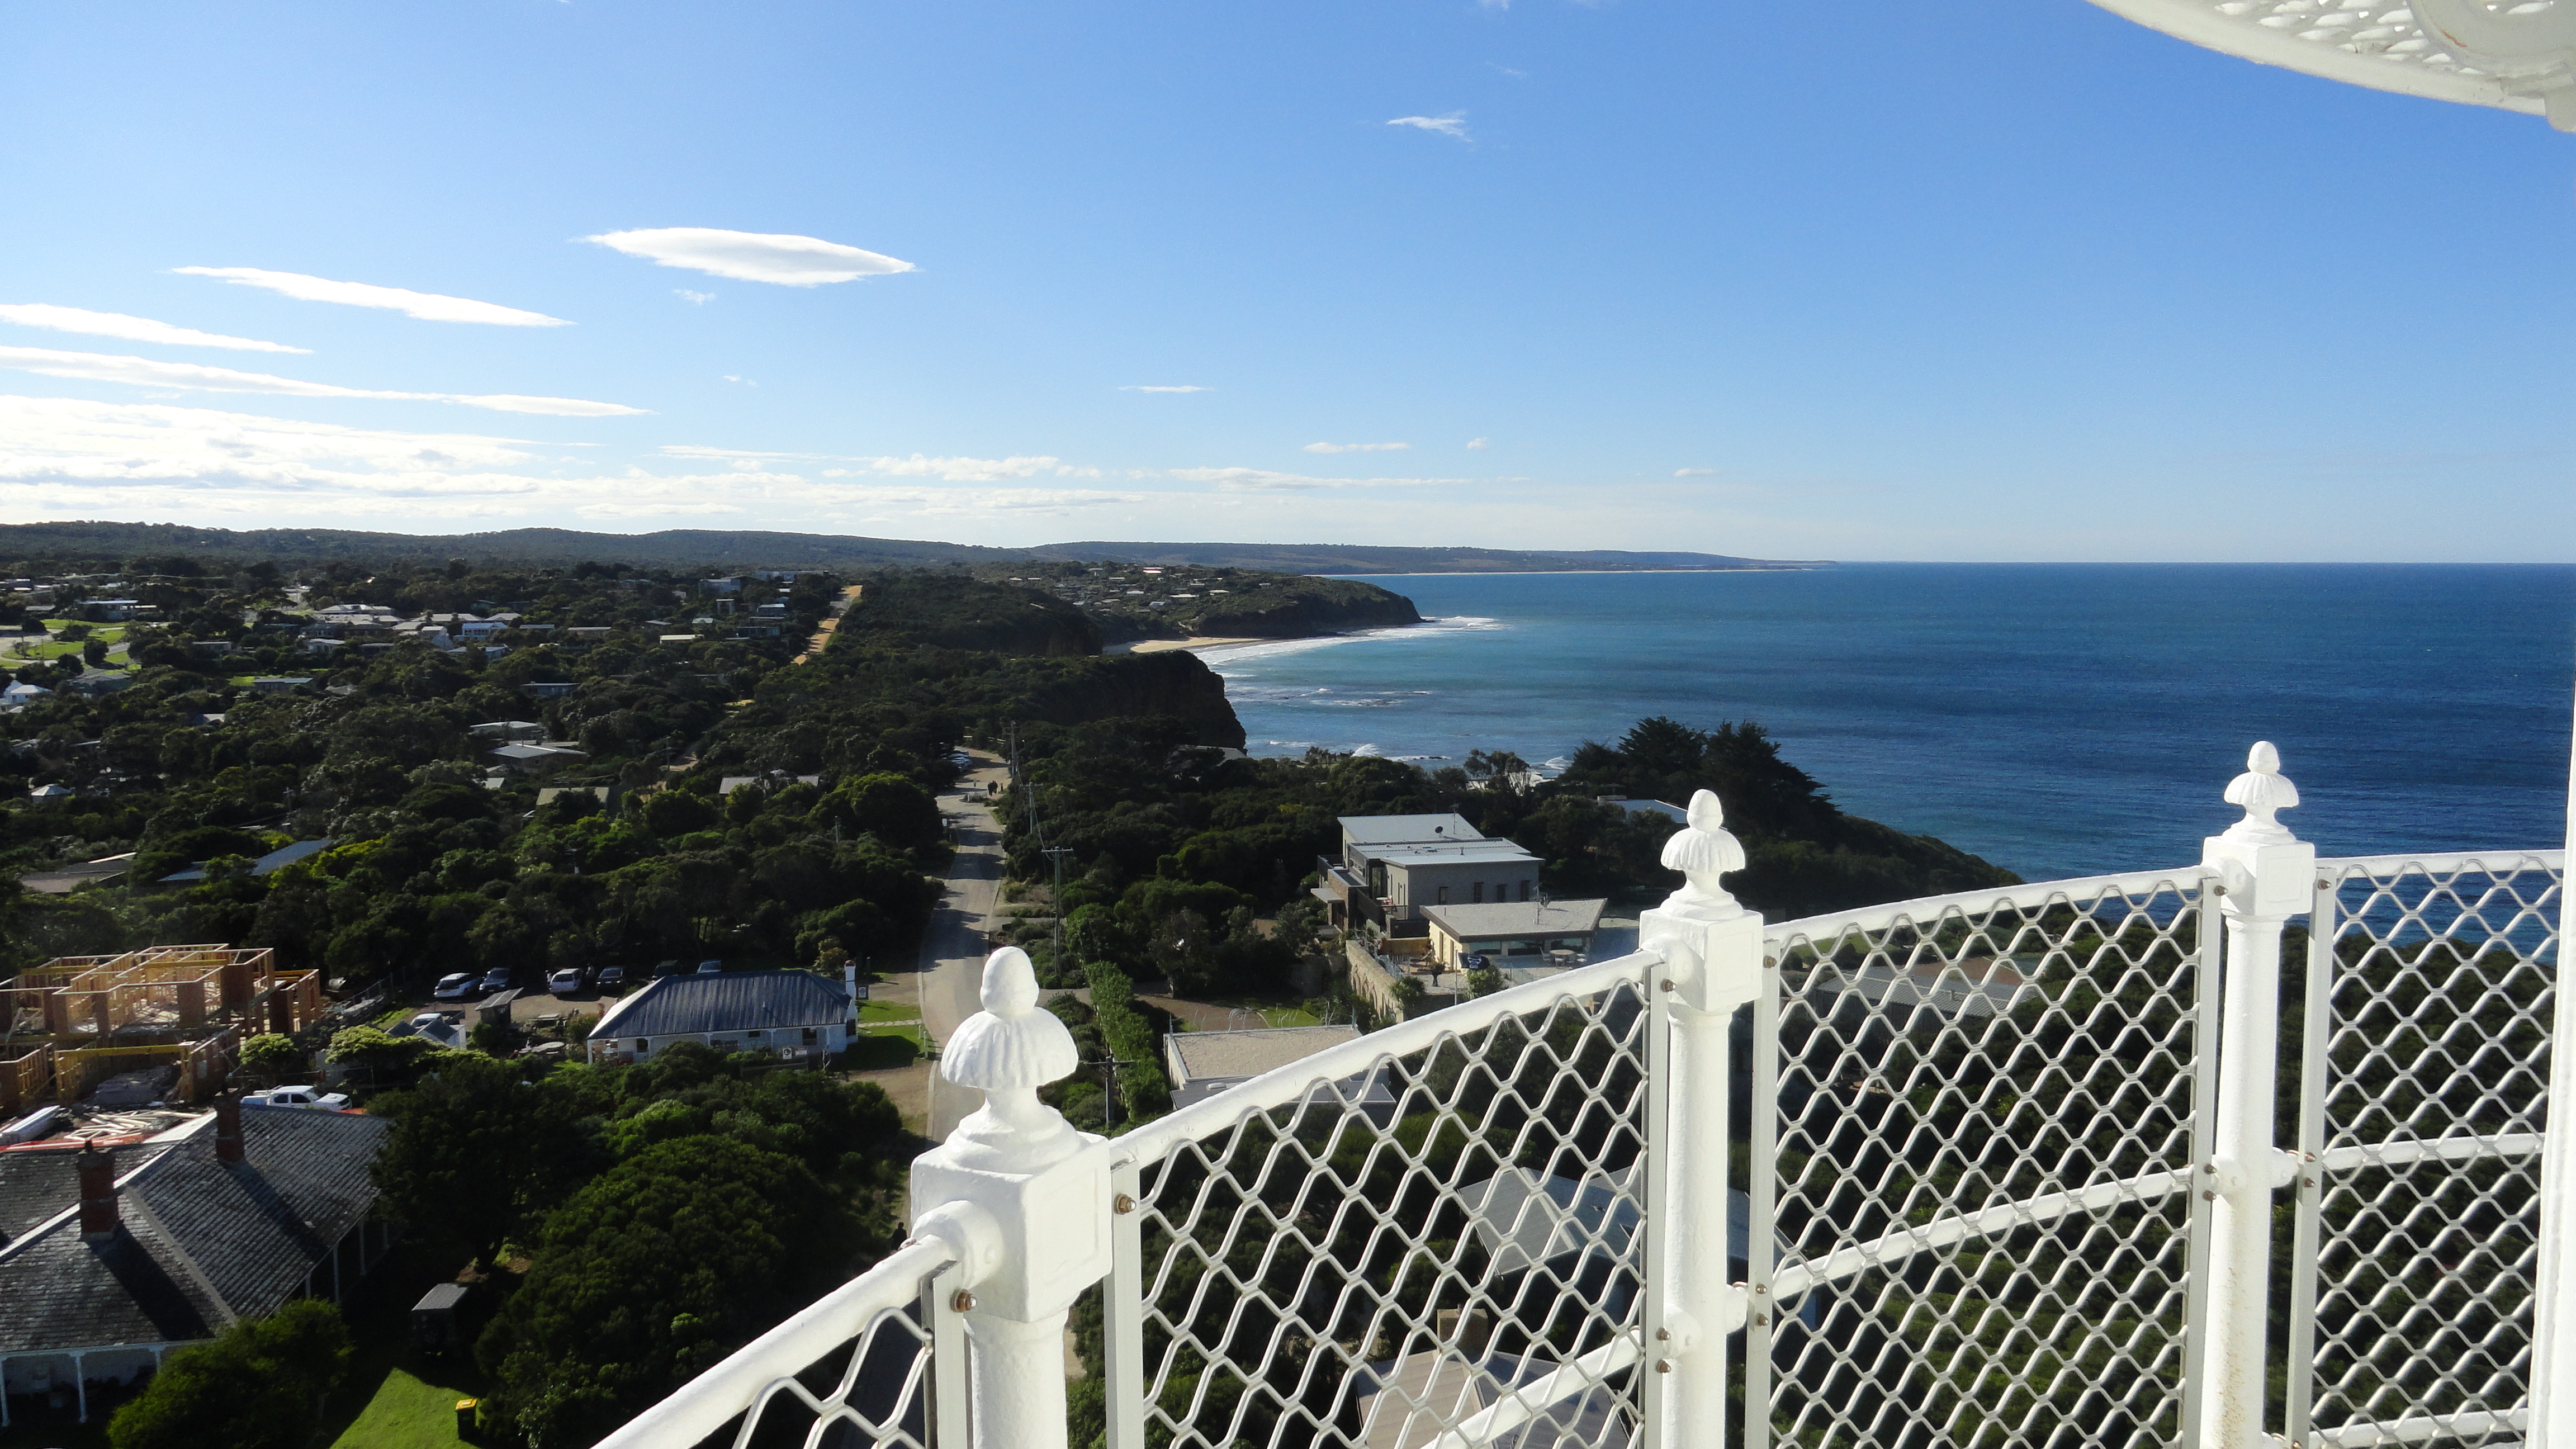 View from the Split Point Lighthouse balcony. Just stunning.